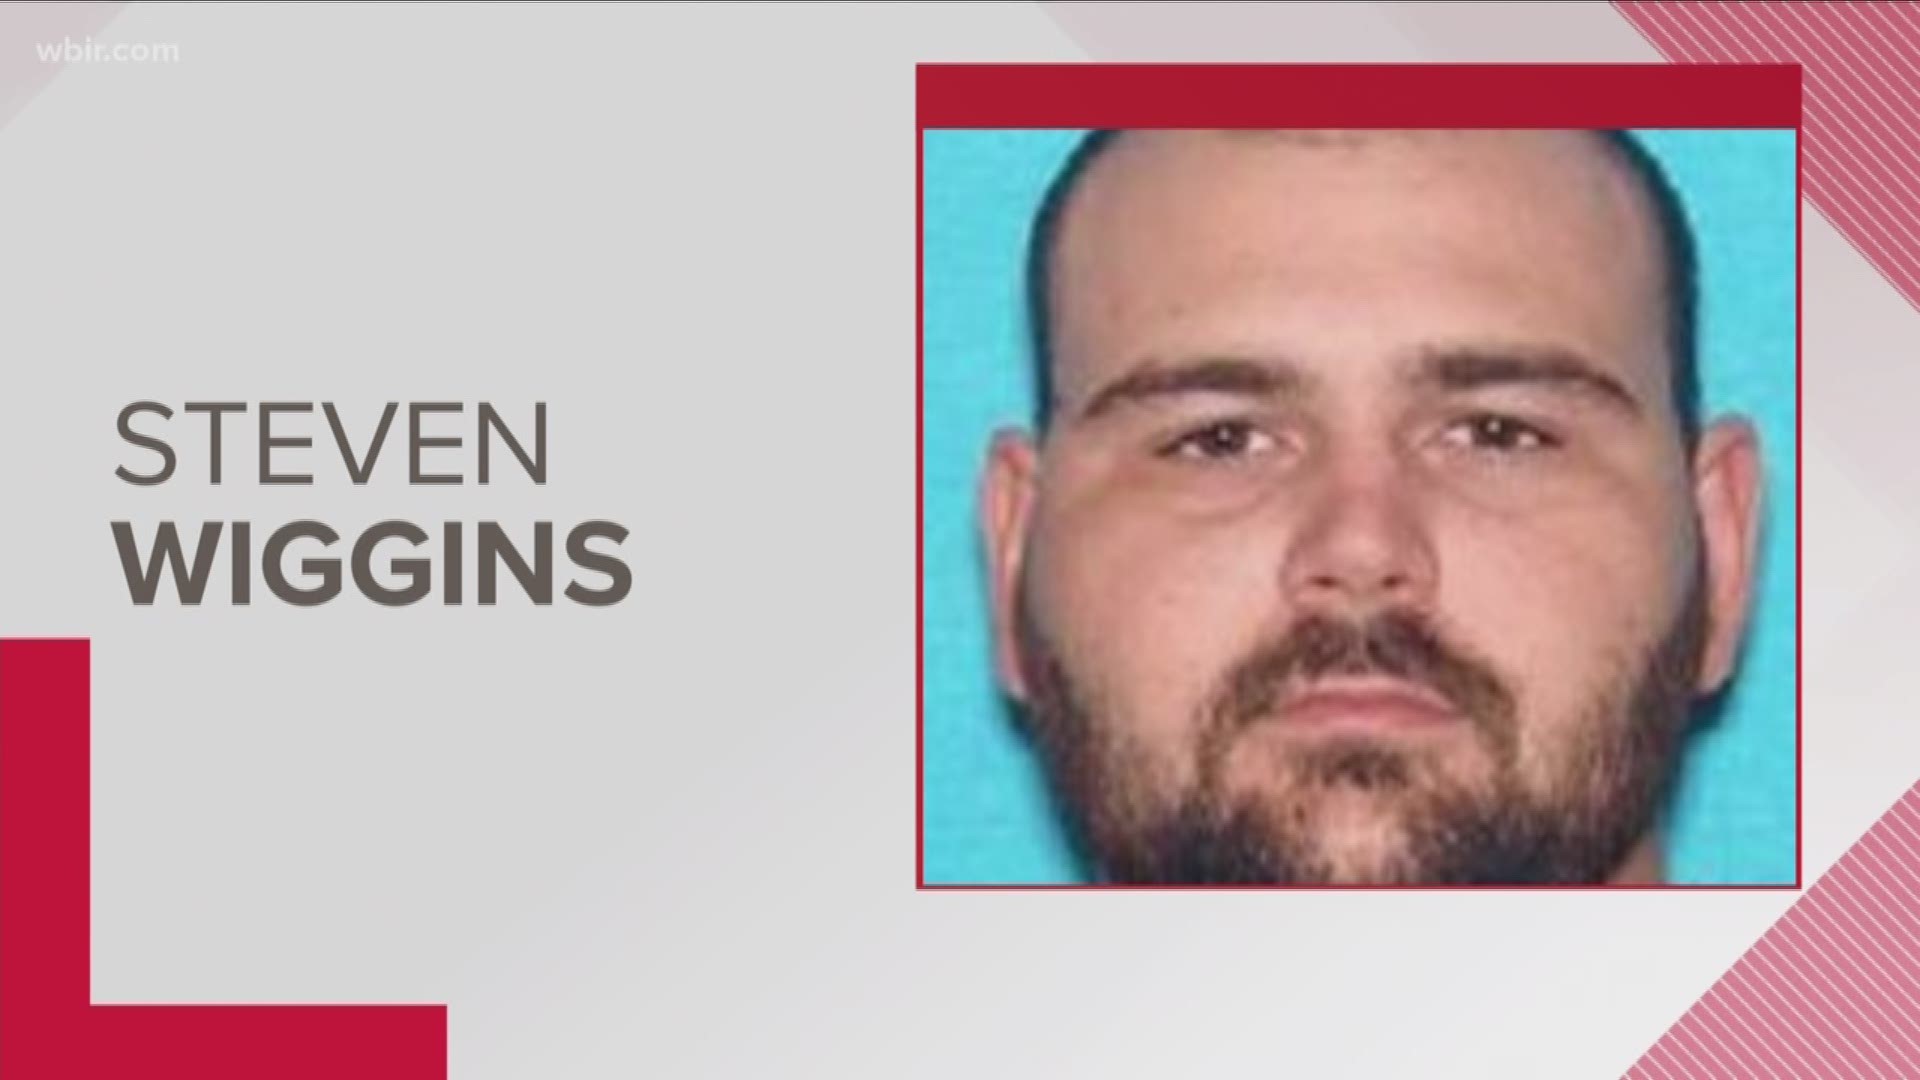 A search is underway in Middle Tennessee for a suspect involved in an early morning altercation with the deputy who was shot and killed after a vehicle was reported stolen in Kingston Springs, according to officials.